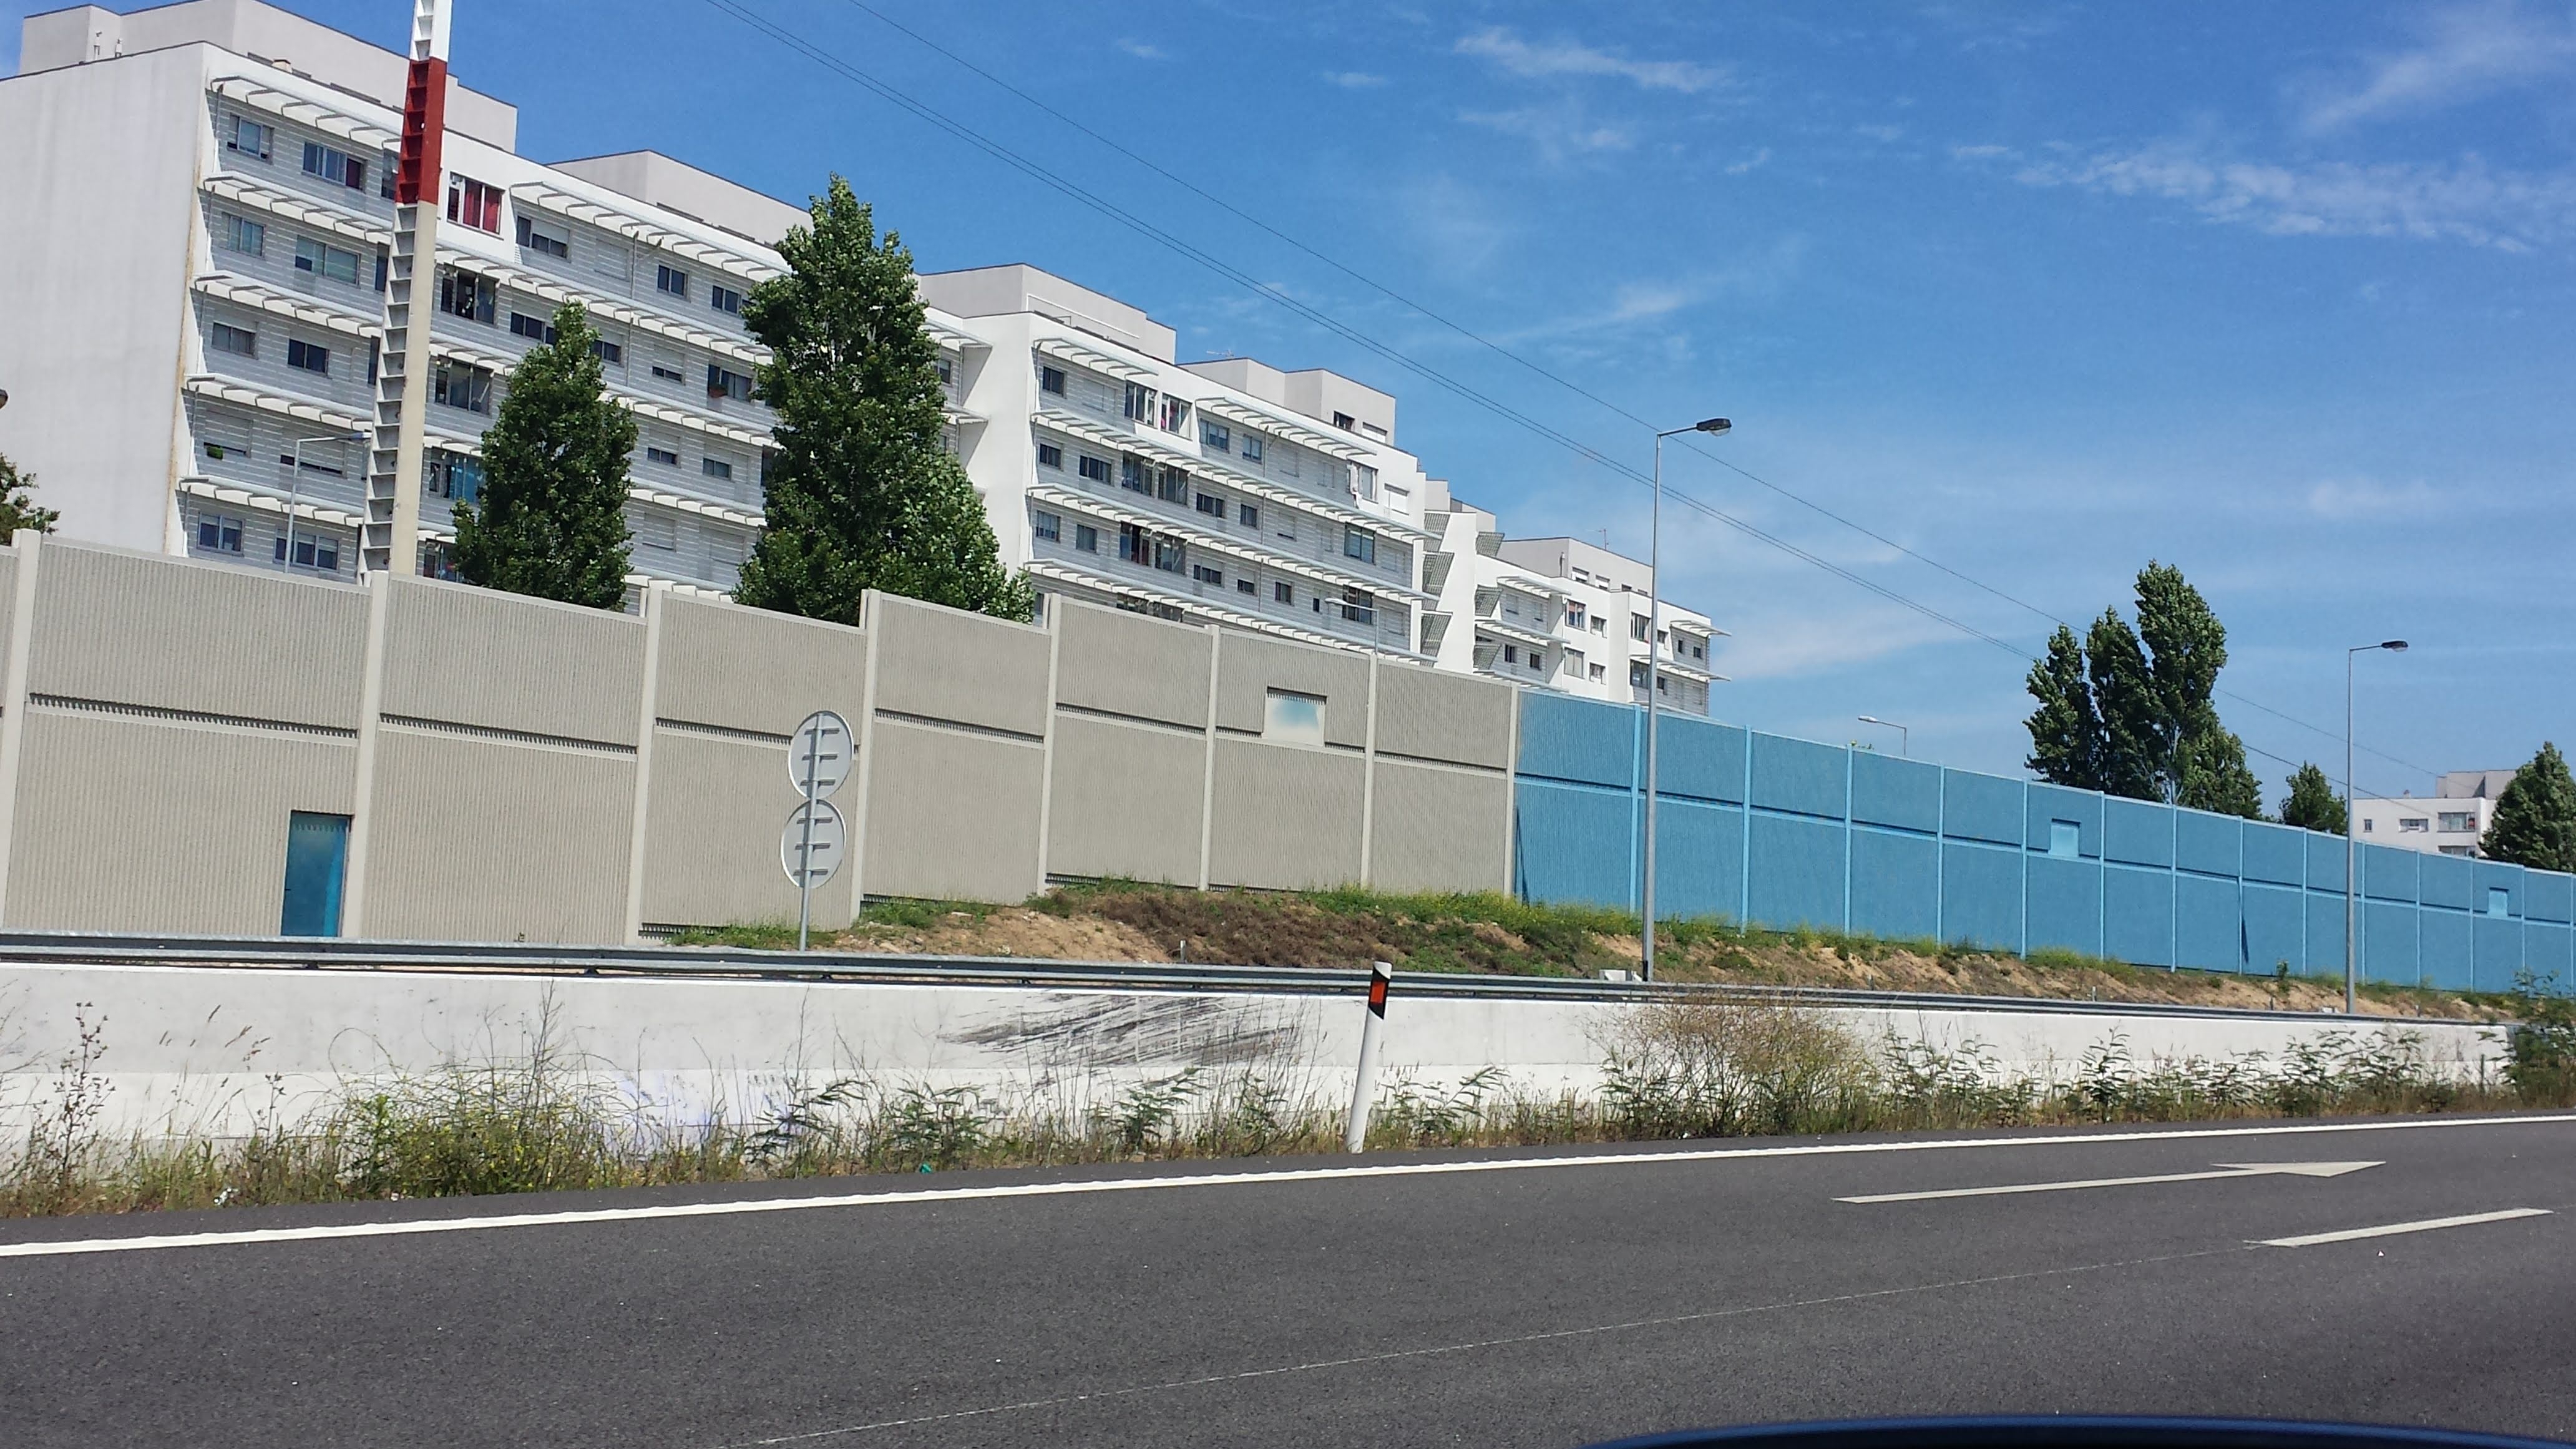 NOISE BARRIERS IN THE CARVALHOS / SANTO OVÍDEO STRETCH OF THE A1- MOTORWAY OF THE NORTH 